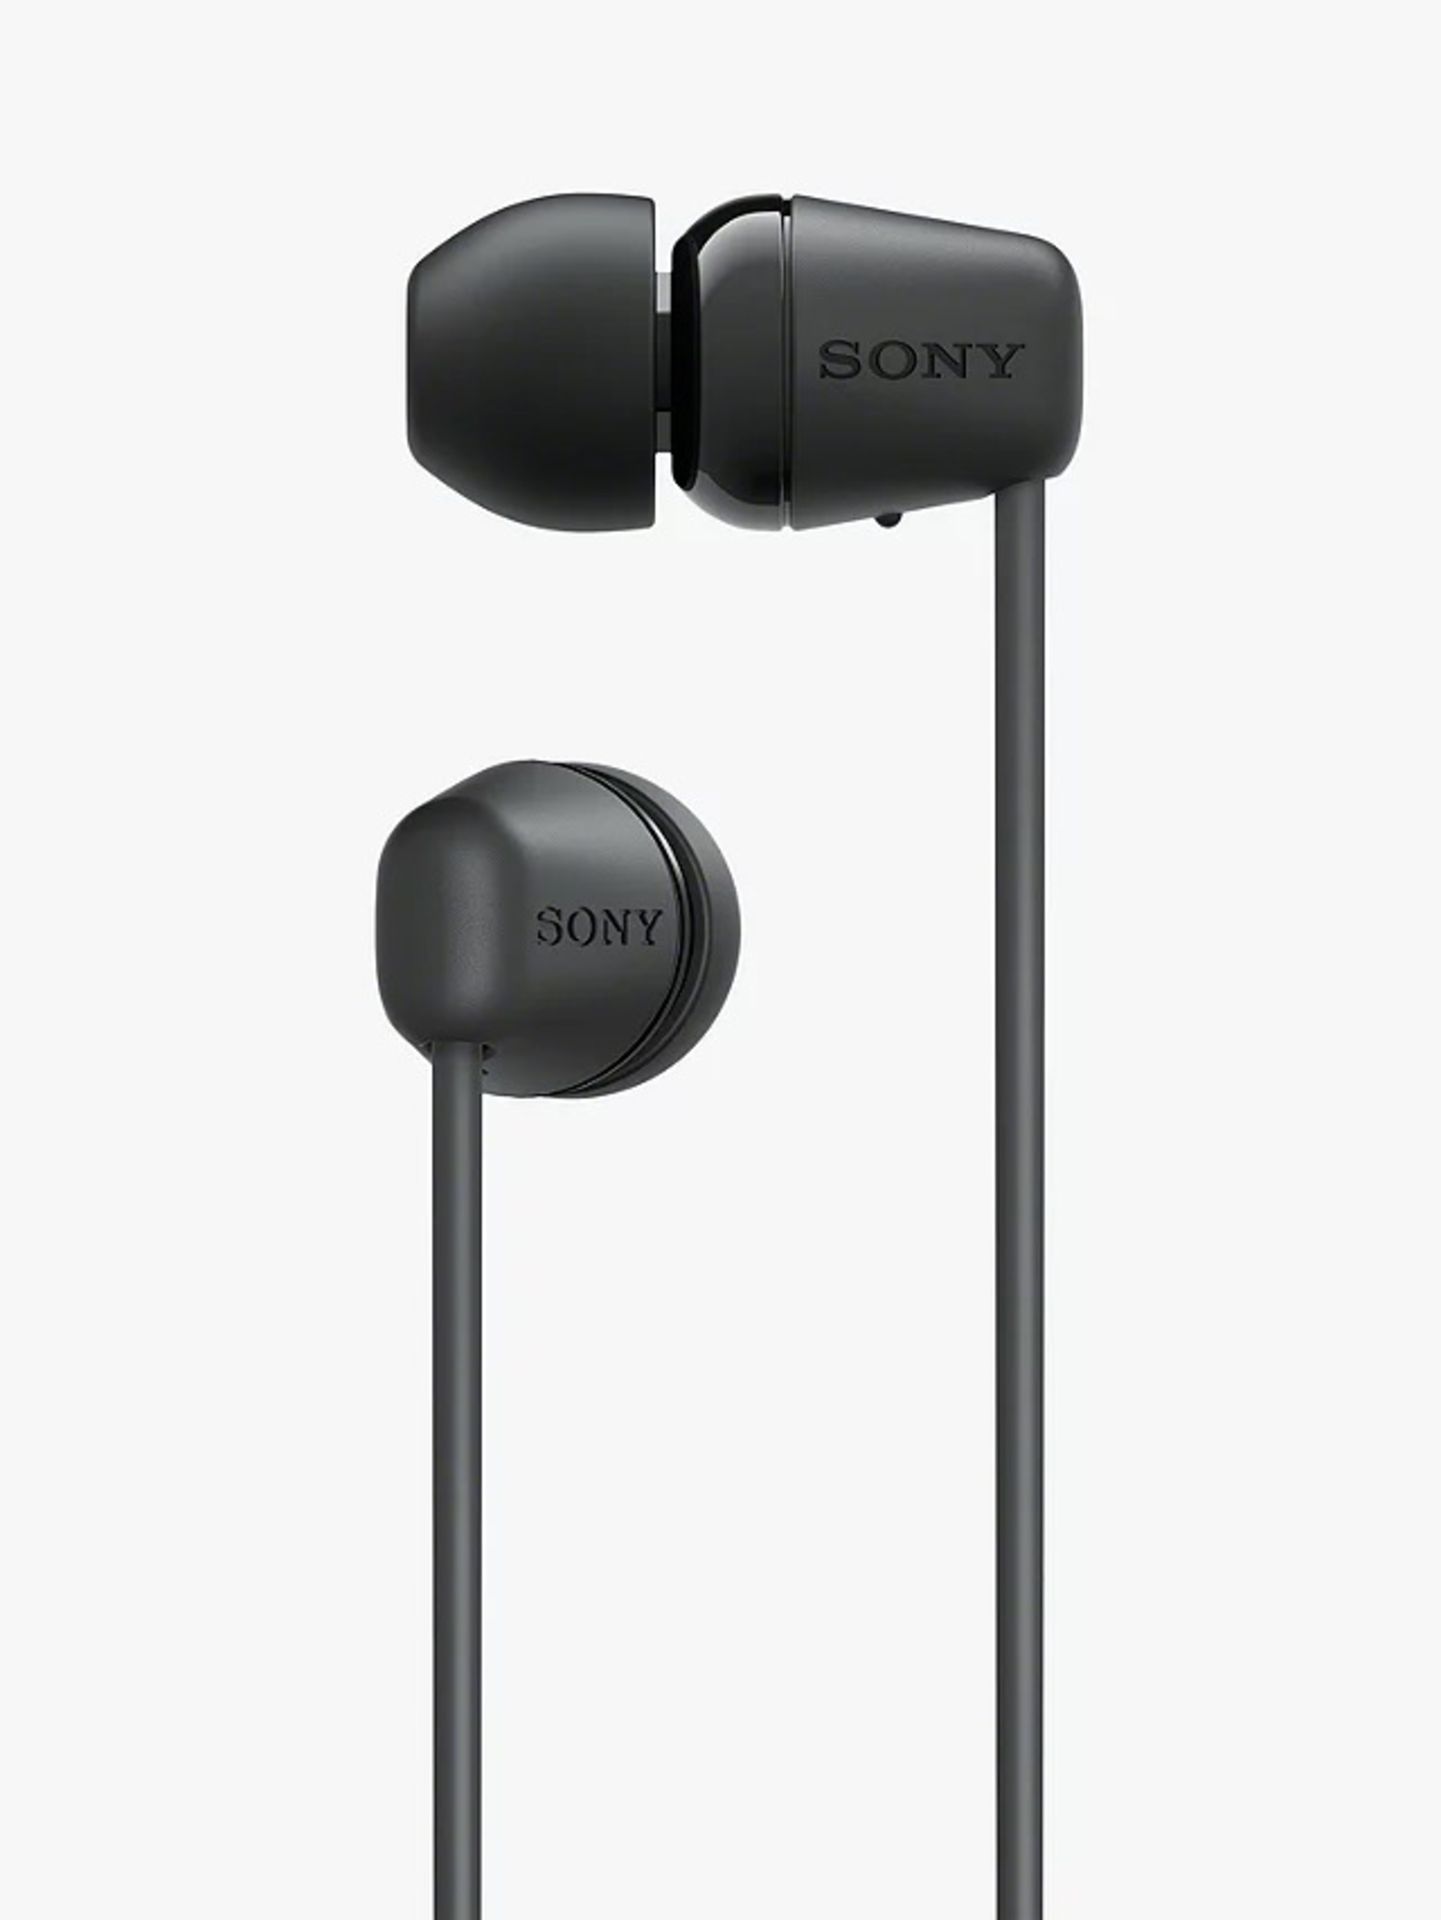 SONY WI-C100 BLUETOOTH WIRELESS IN-EAR HEADPHONES WITH MIC/REMOTE IN BLACK - RRP £35 - Image 2 of 6